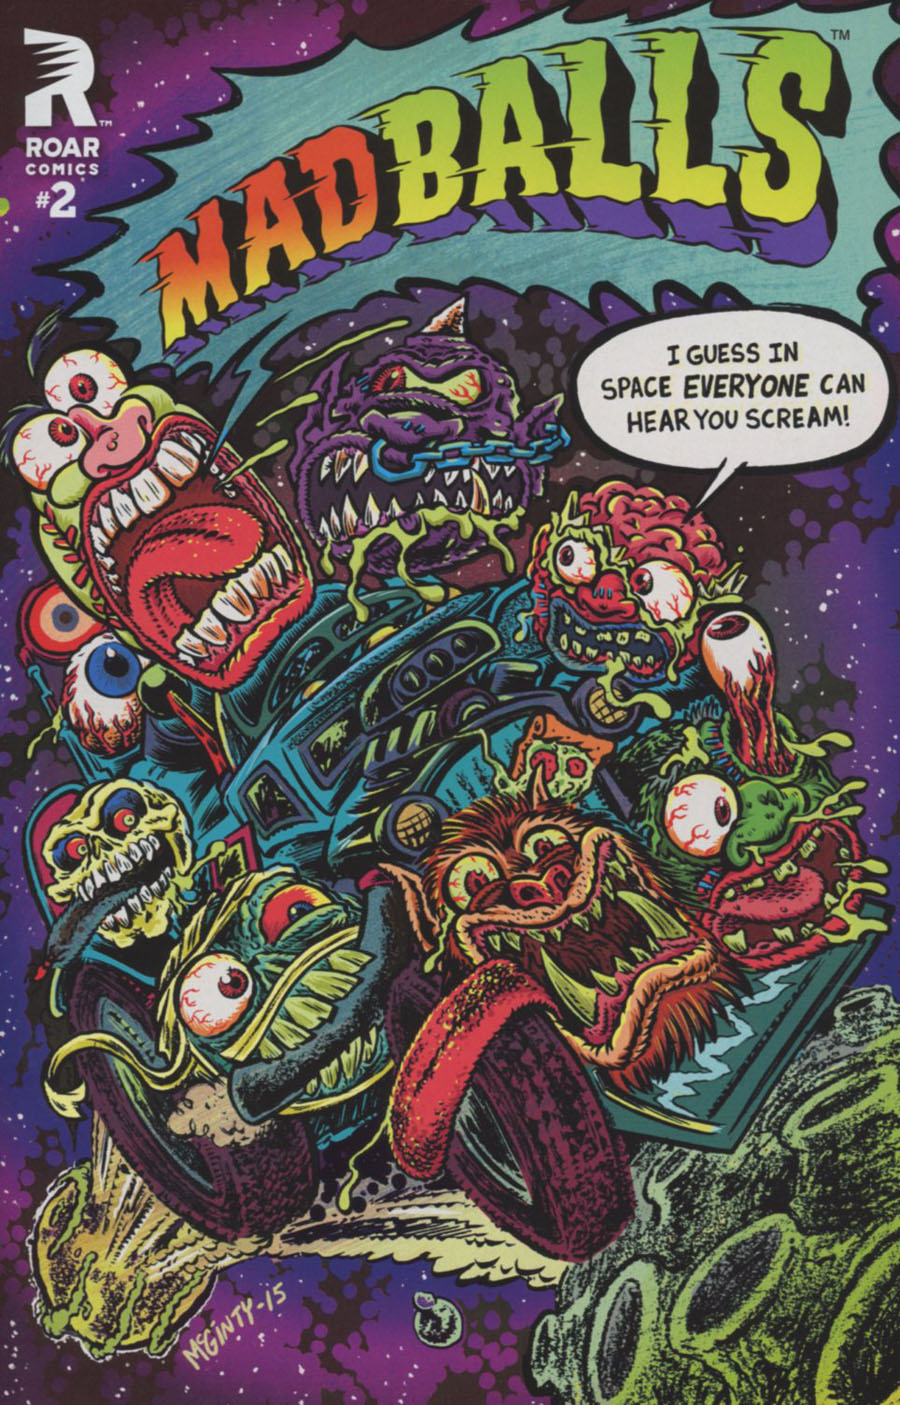 Mad Balls #2 Cover A Regular Brad McGinty Cover